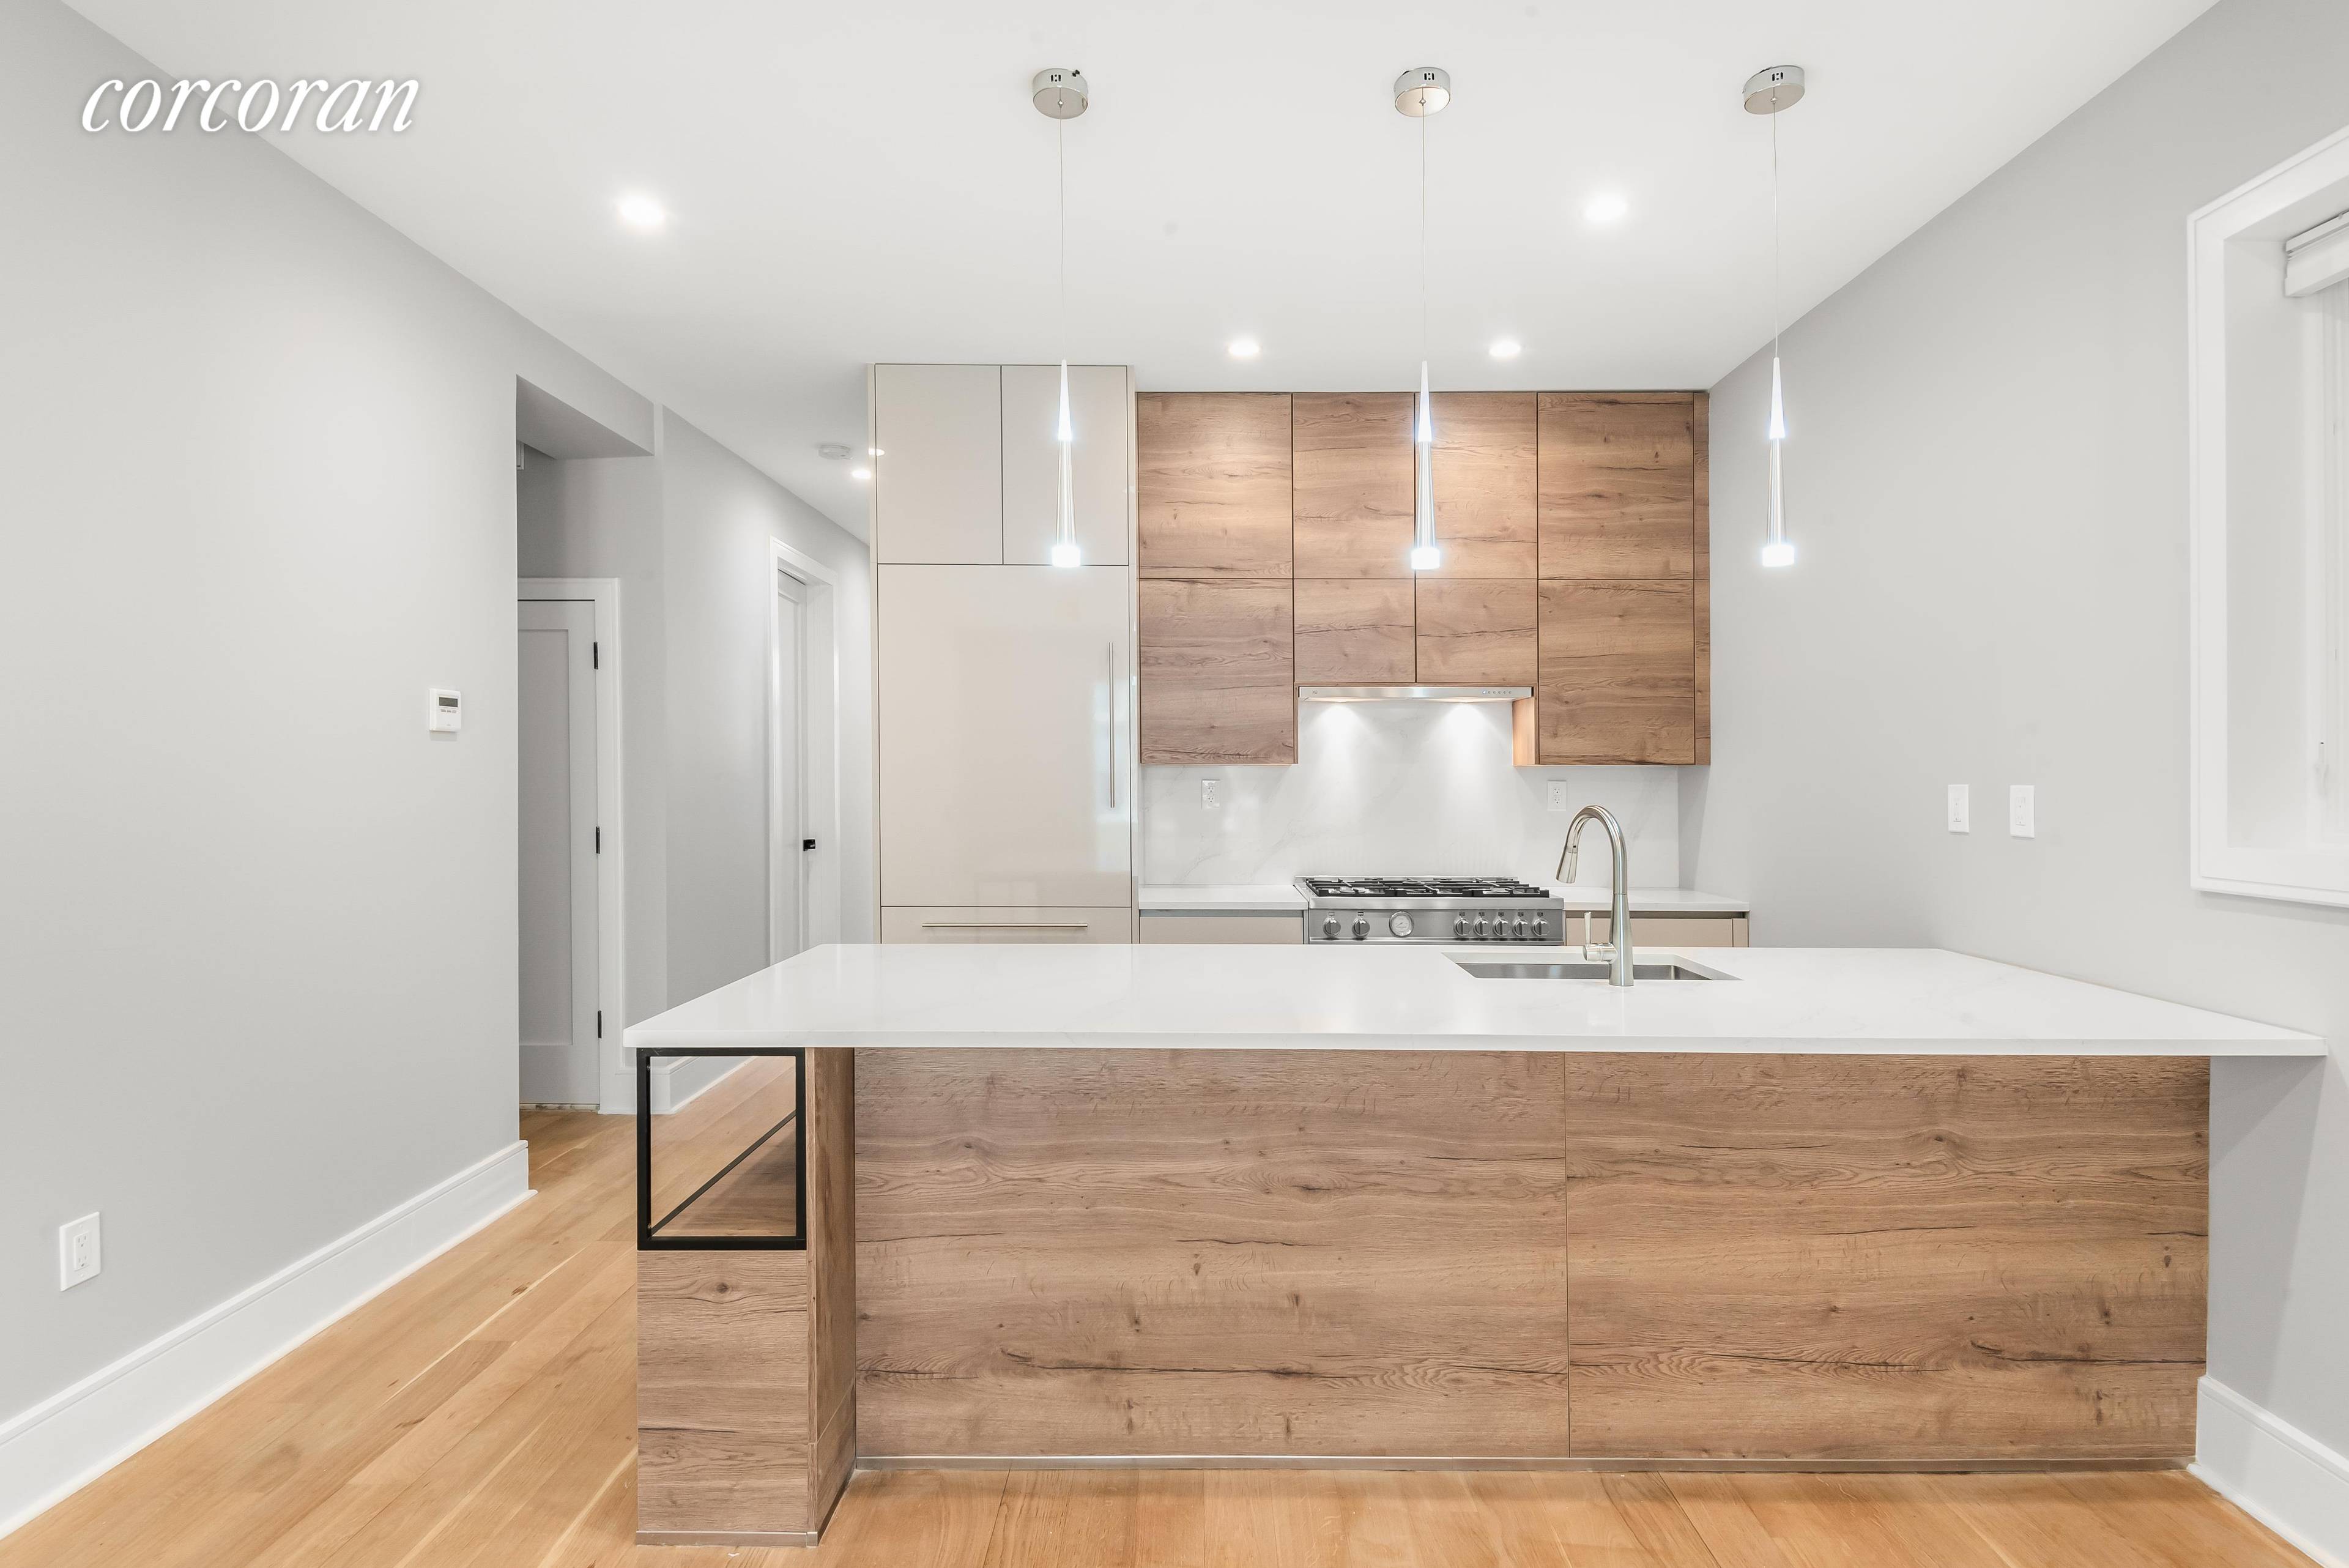 541 Lafayette Avenue is a brand new boutique condominium building on the Clinton Hill Bedford Stuyvesant border, featuring three enormous units, each with private outdoor space.